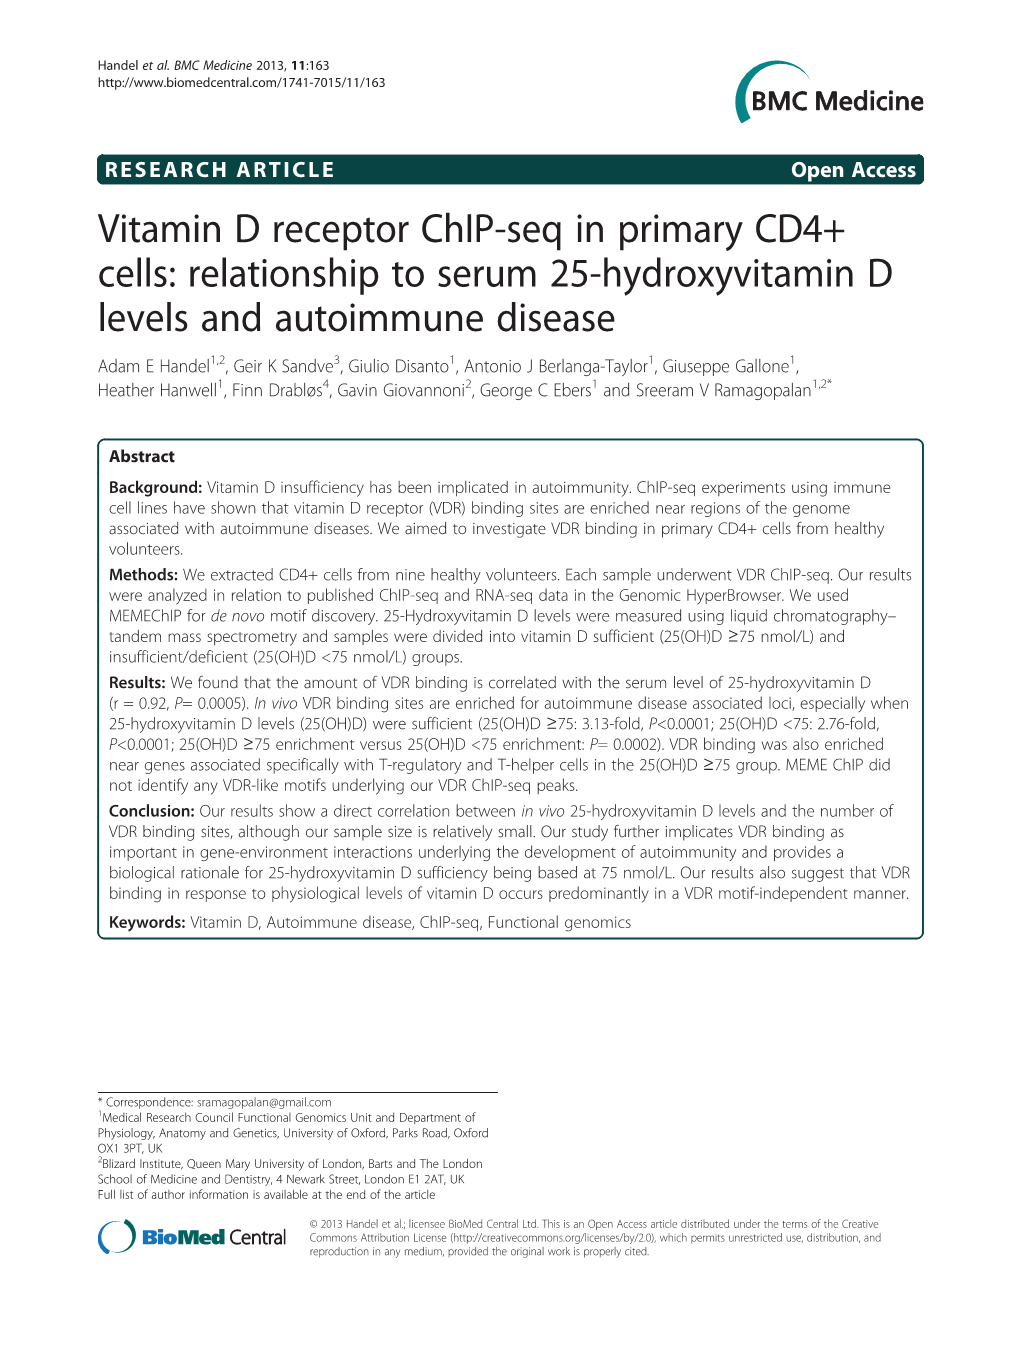 Vitamin D Receptor Chip-Seq in Primary CD4+ Cells: Relationship to Serum 25-Hydroxyvitamin D Levels and Autoimmune Disease